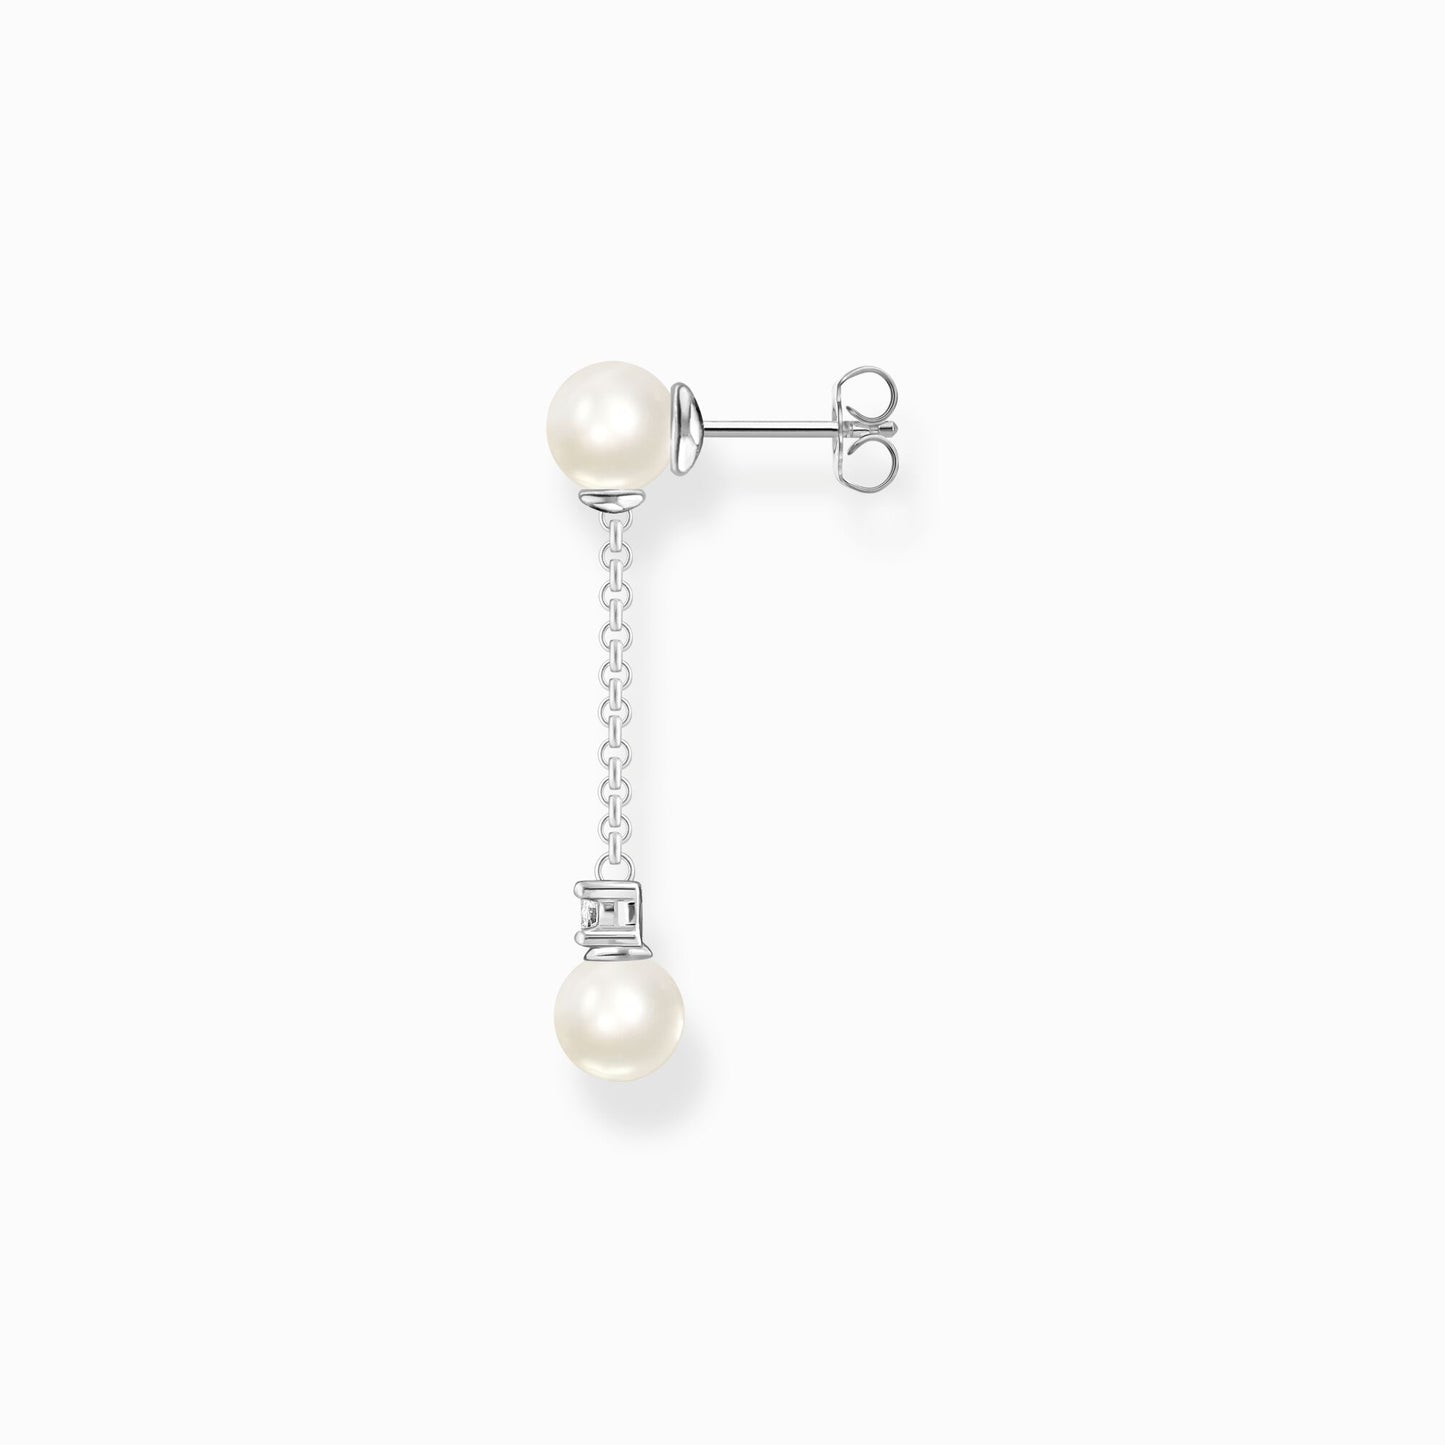 Thomas Sabo Single Earring Pearls With White Stone Silver H2212-167-14